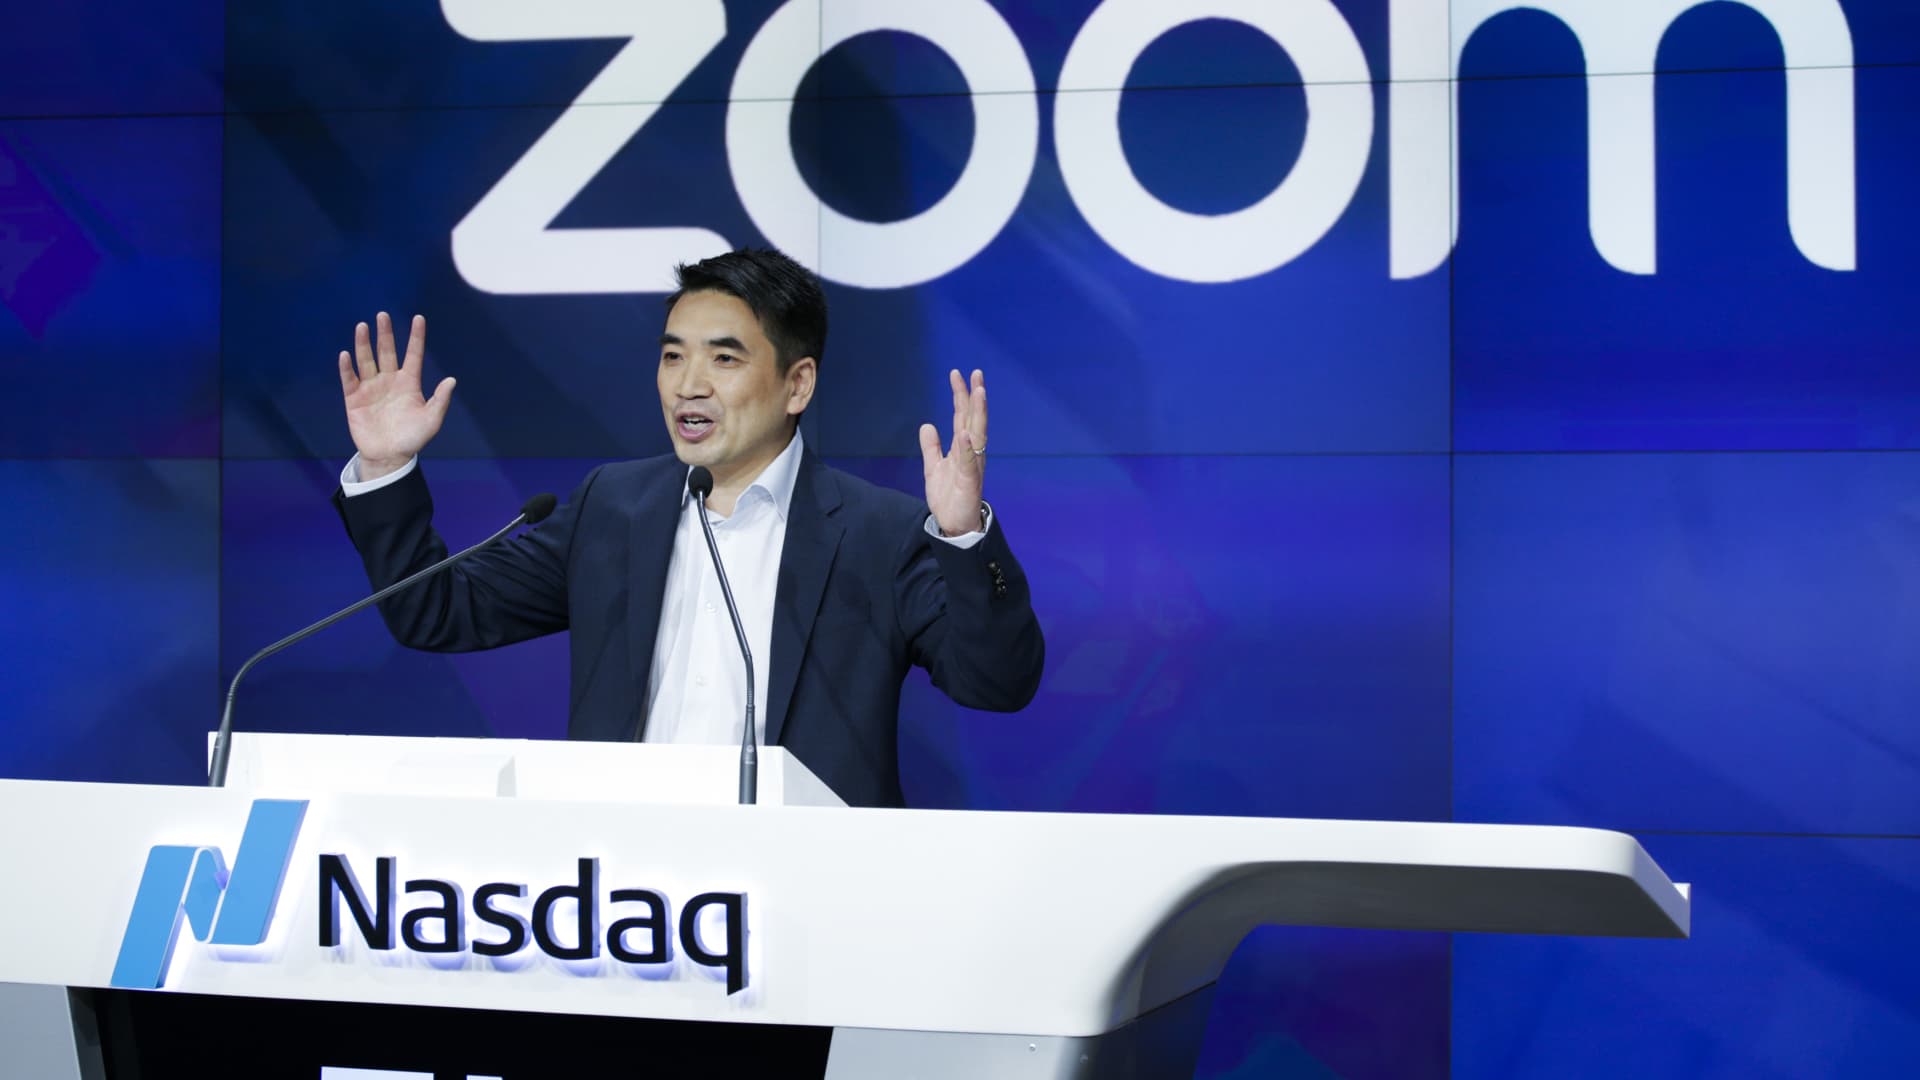 Zoom shares jump on better-than-expected fourth-quarter results 